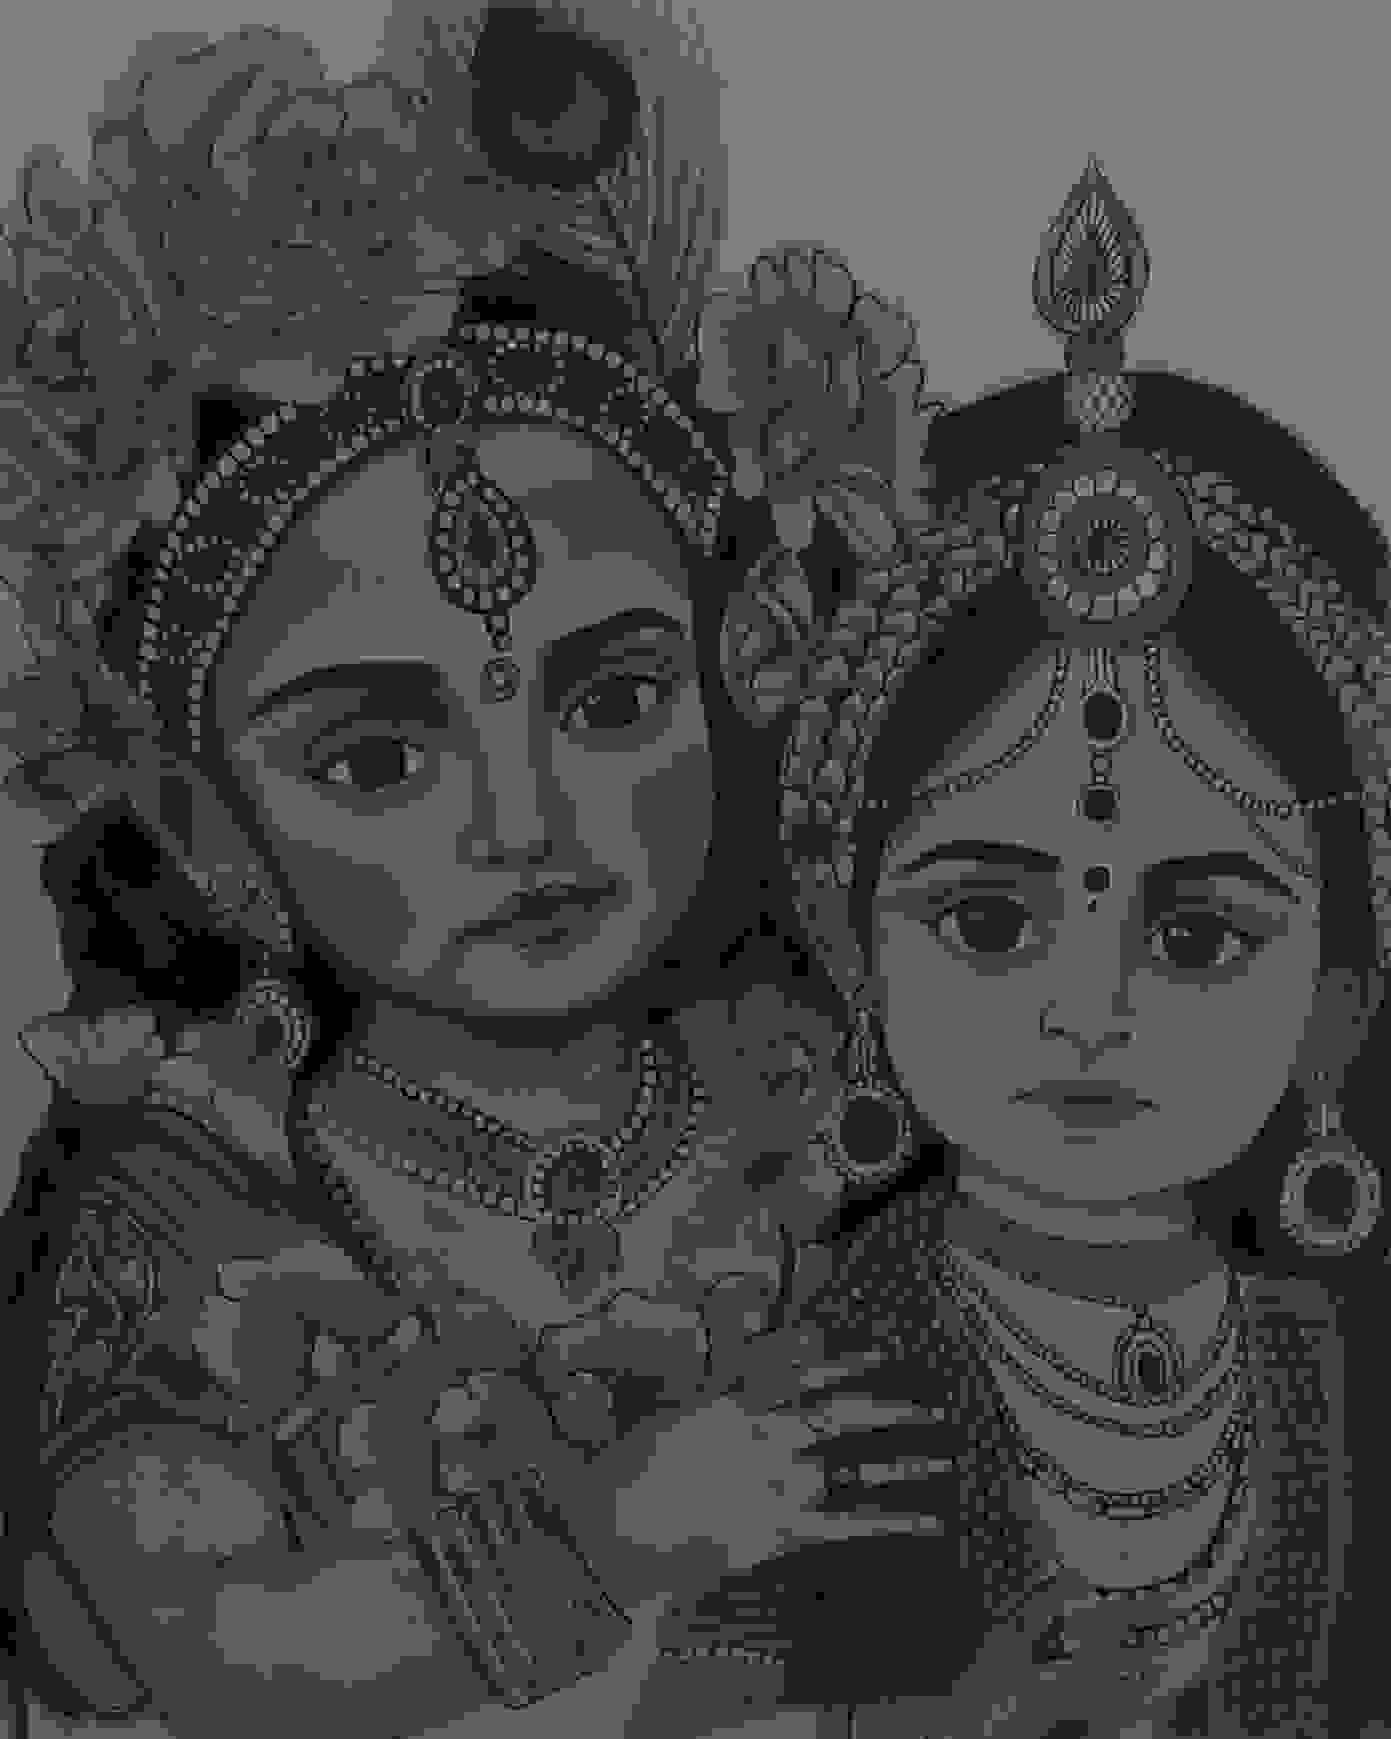 Painting Of Radhakrishna In Pencil Sketch Size A3 Sq Cm